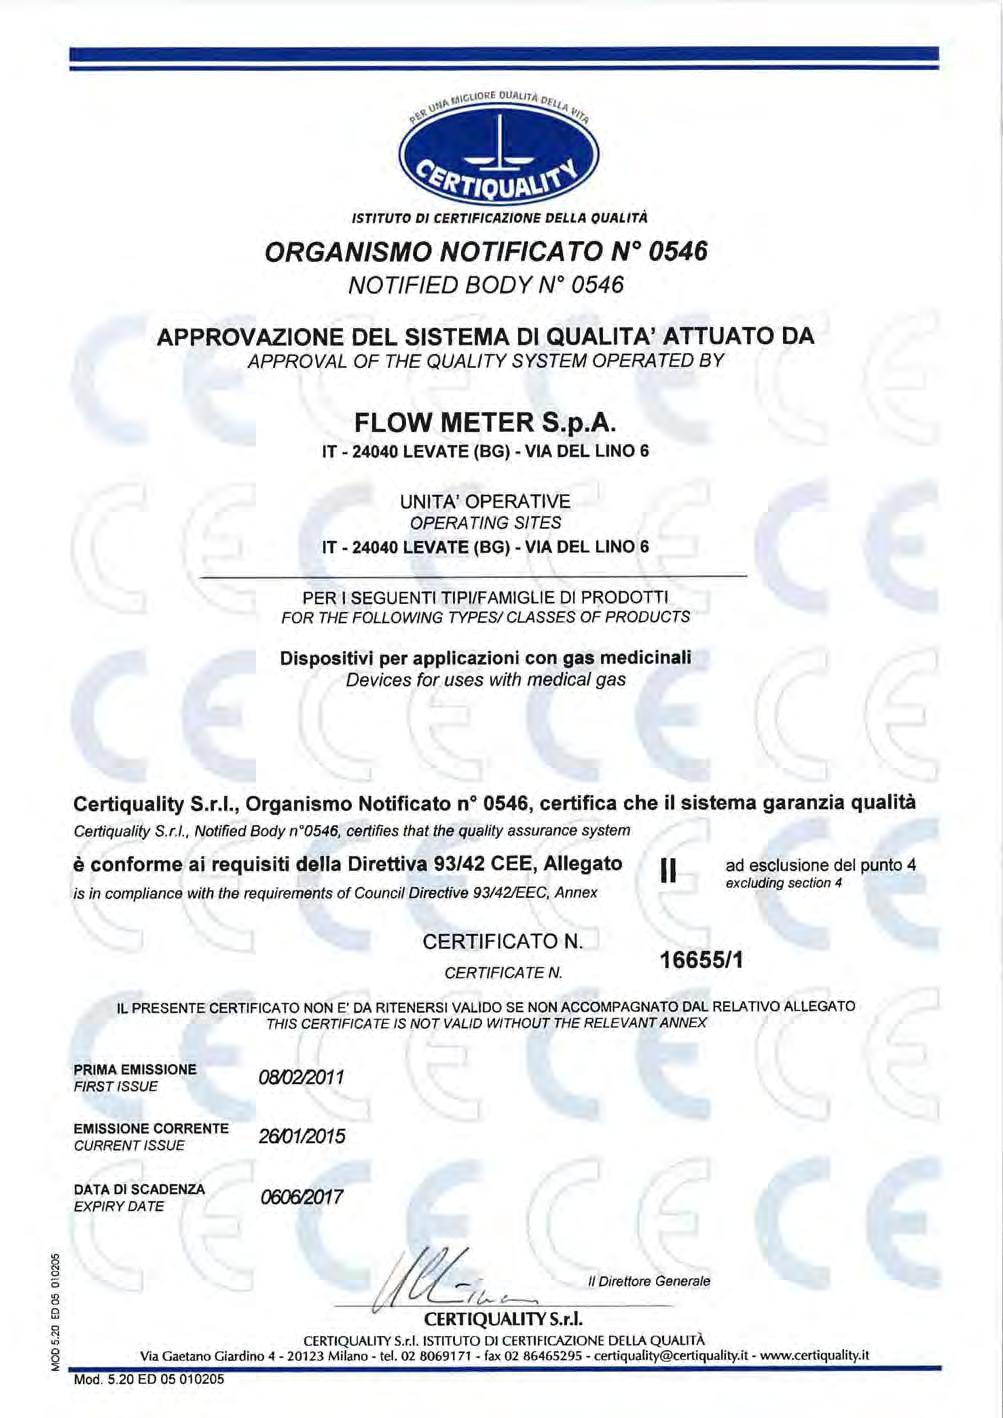 Attachment 02 EC marking certificate issued